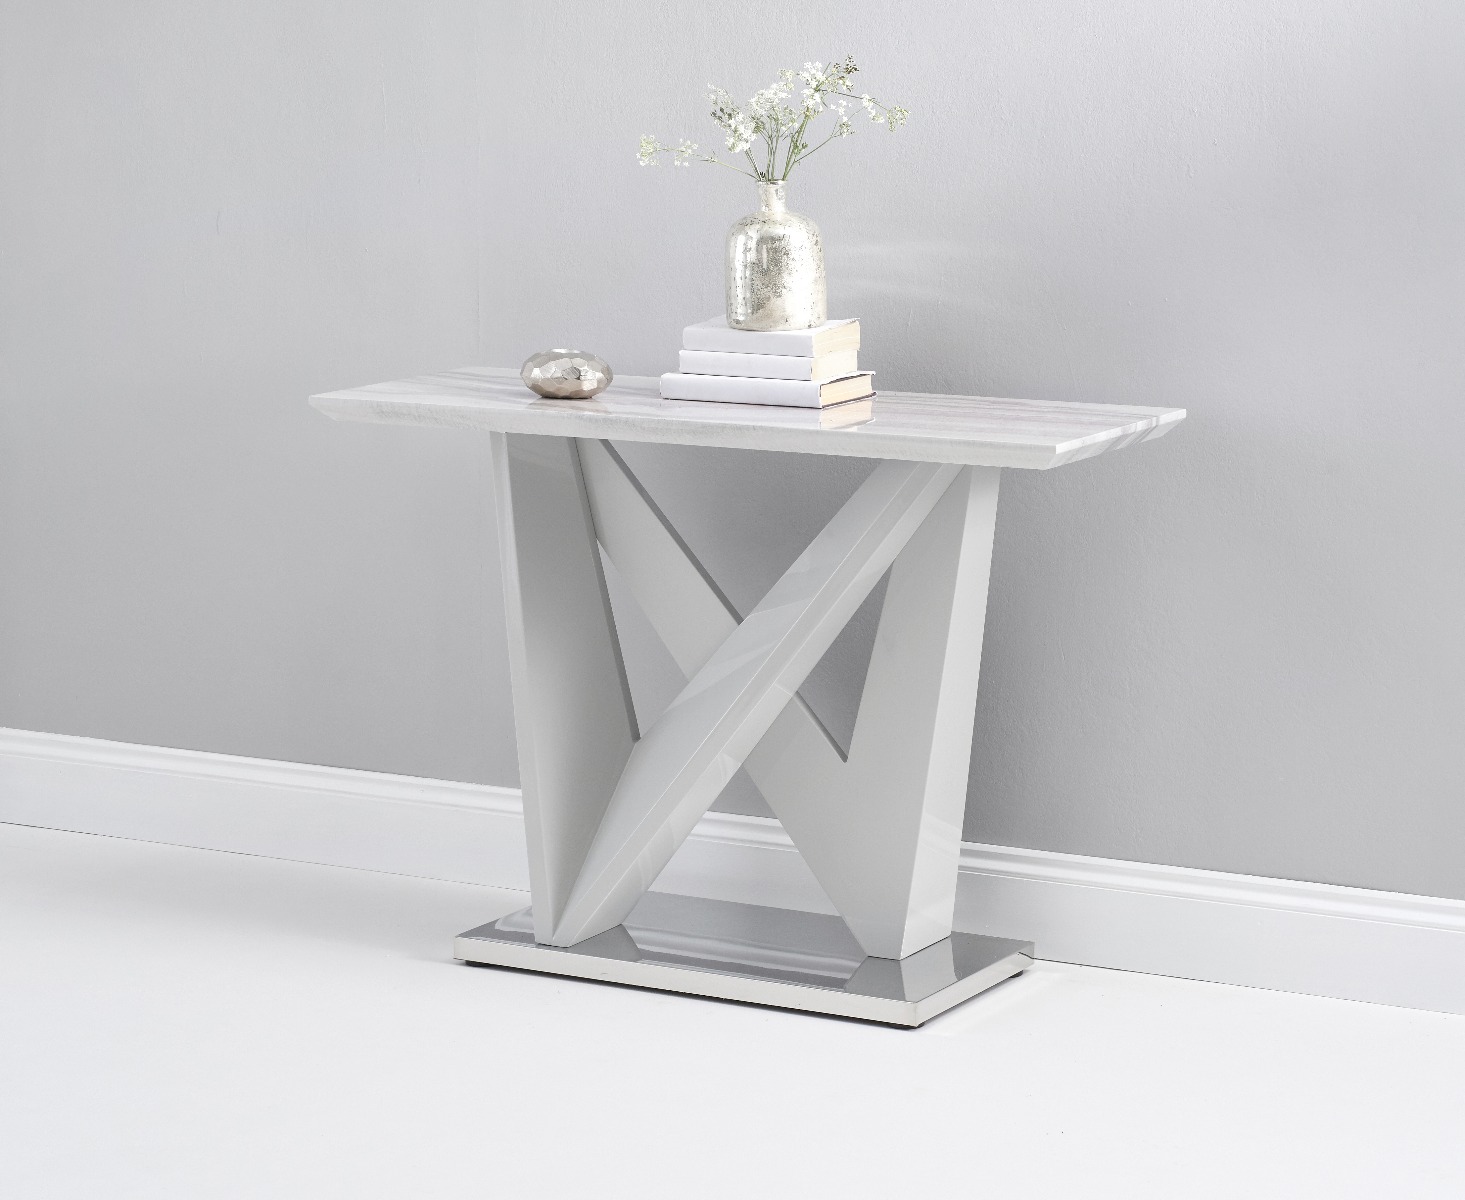 Photo 1 of Reims marble effect carrera light grey console table